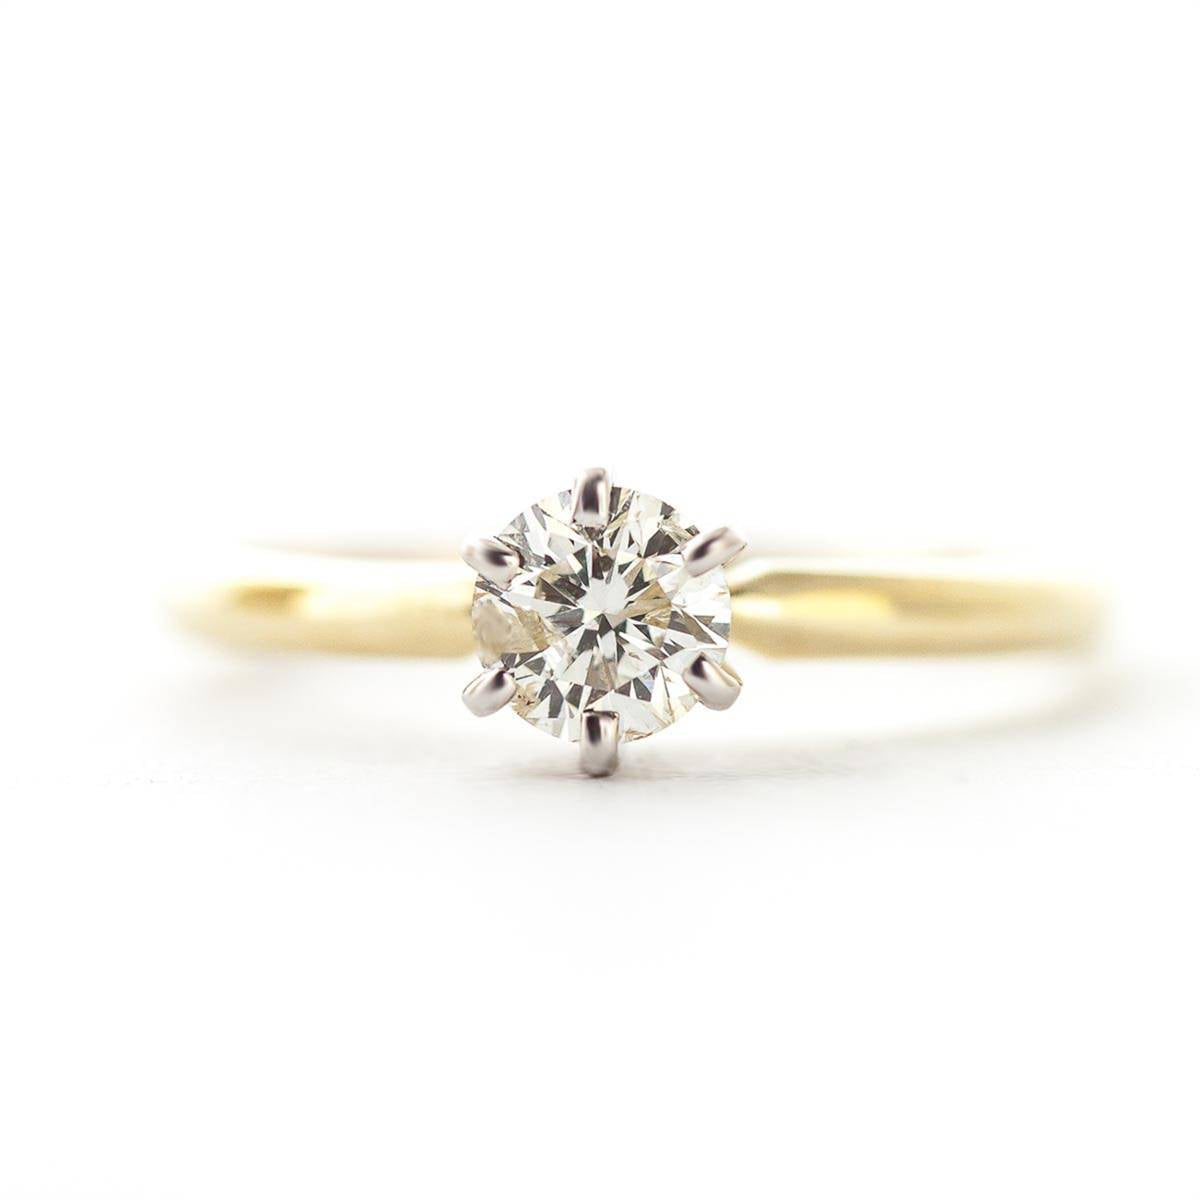 14K Solid Yellow Gold Solitaire Ring w/ 0.40 Carat H-i, Si-2 Natural Diamond